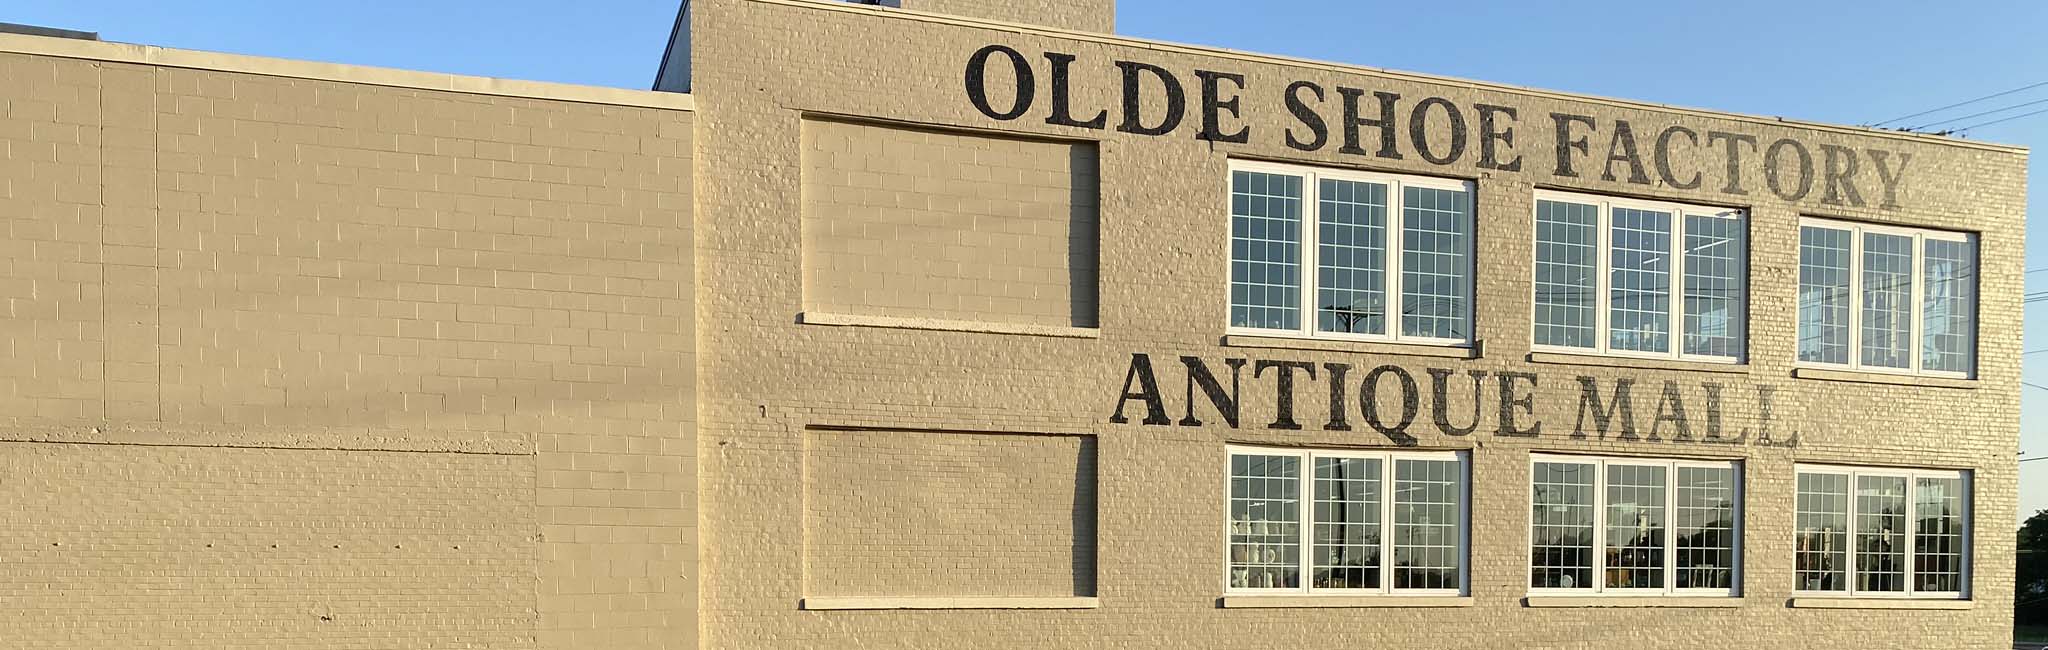 Olde Shoe Factory Antique Mall building